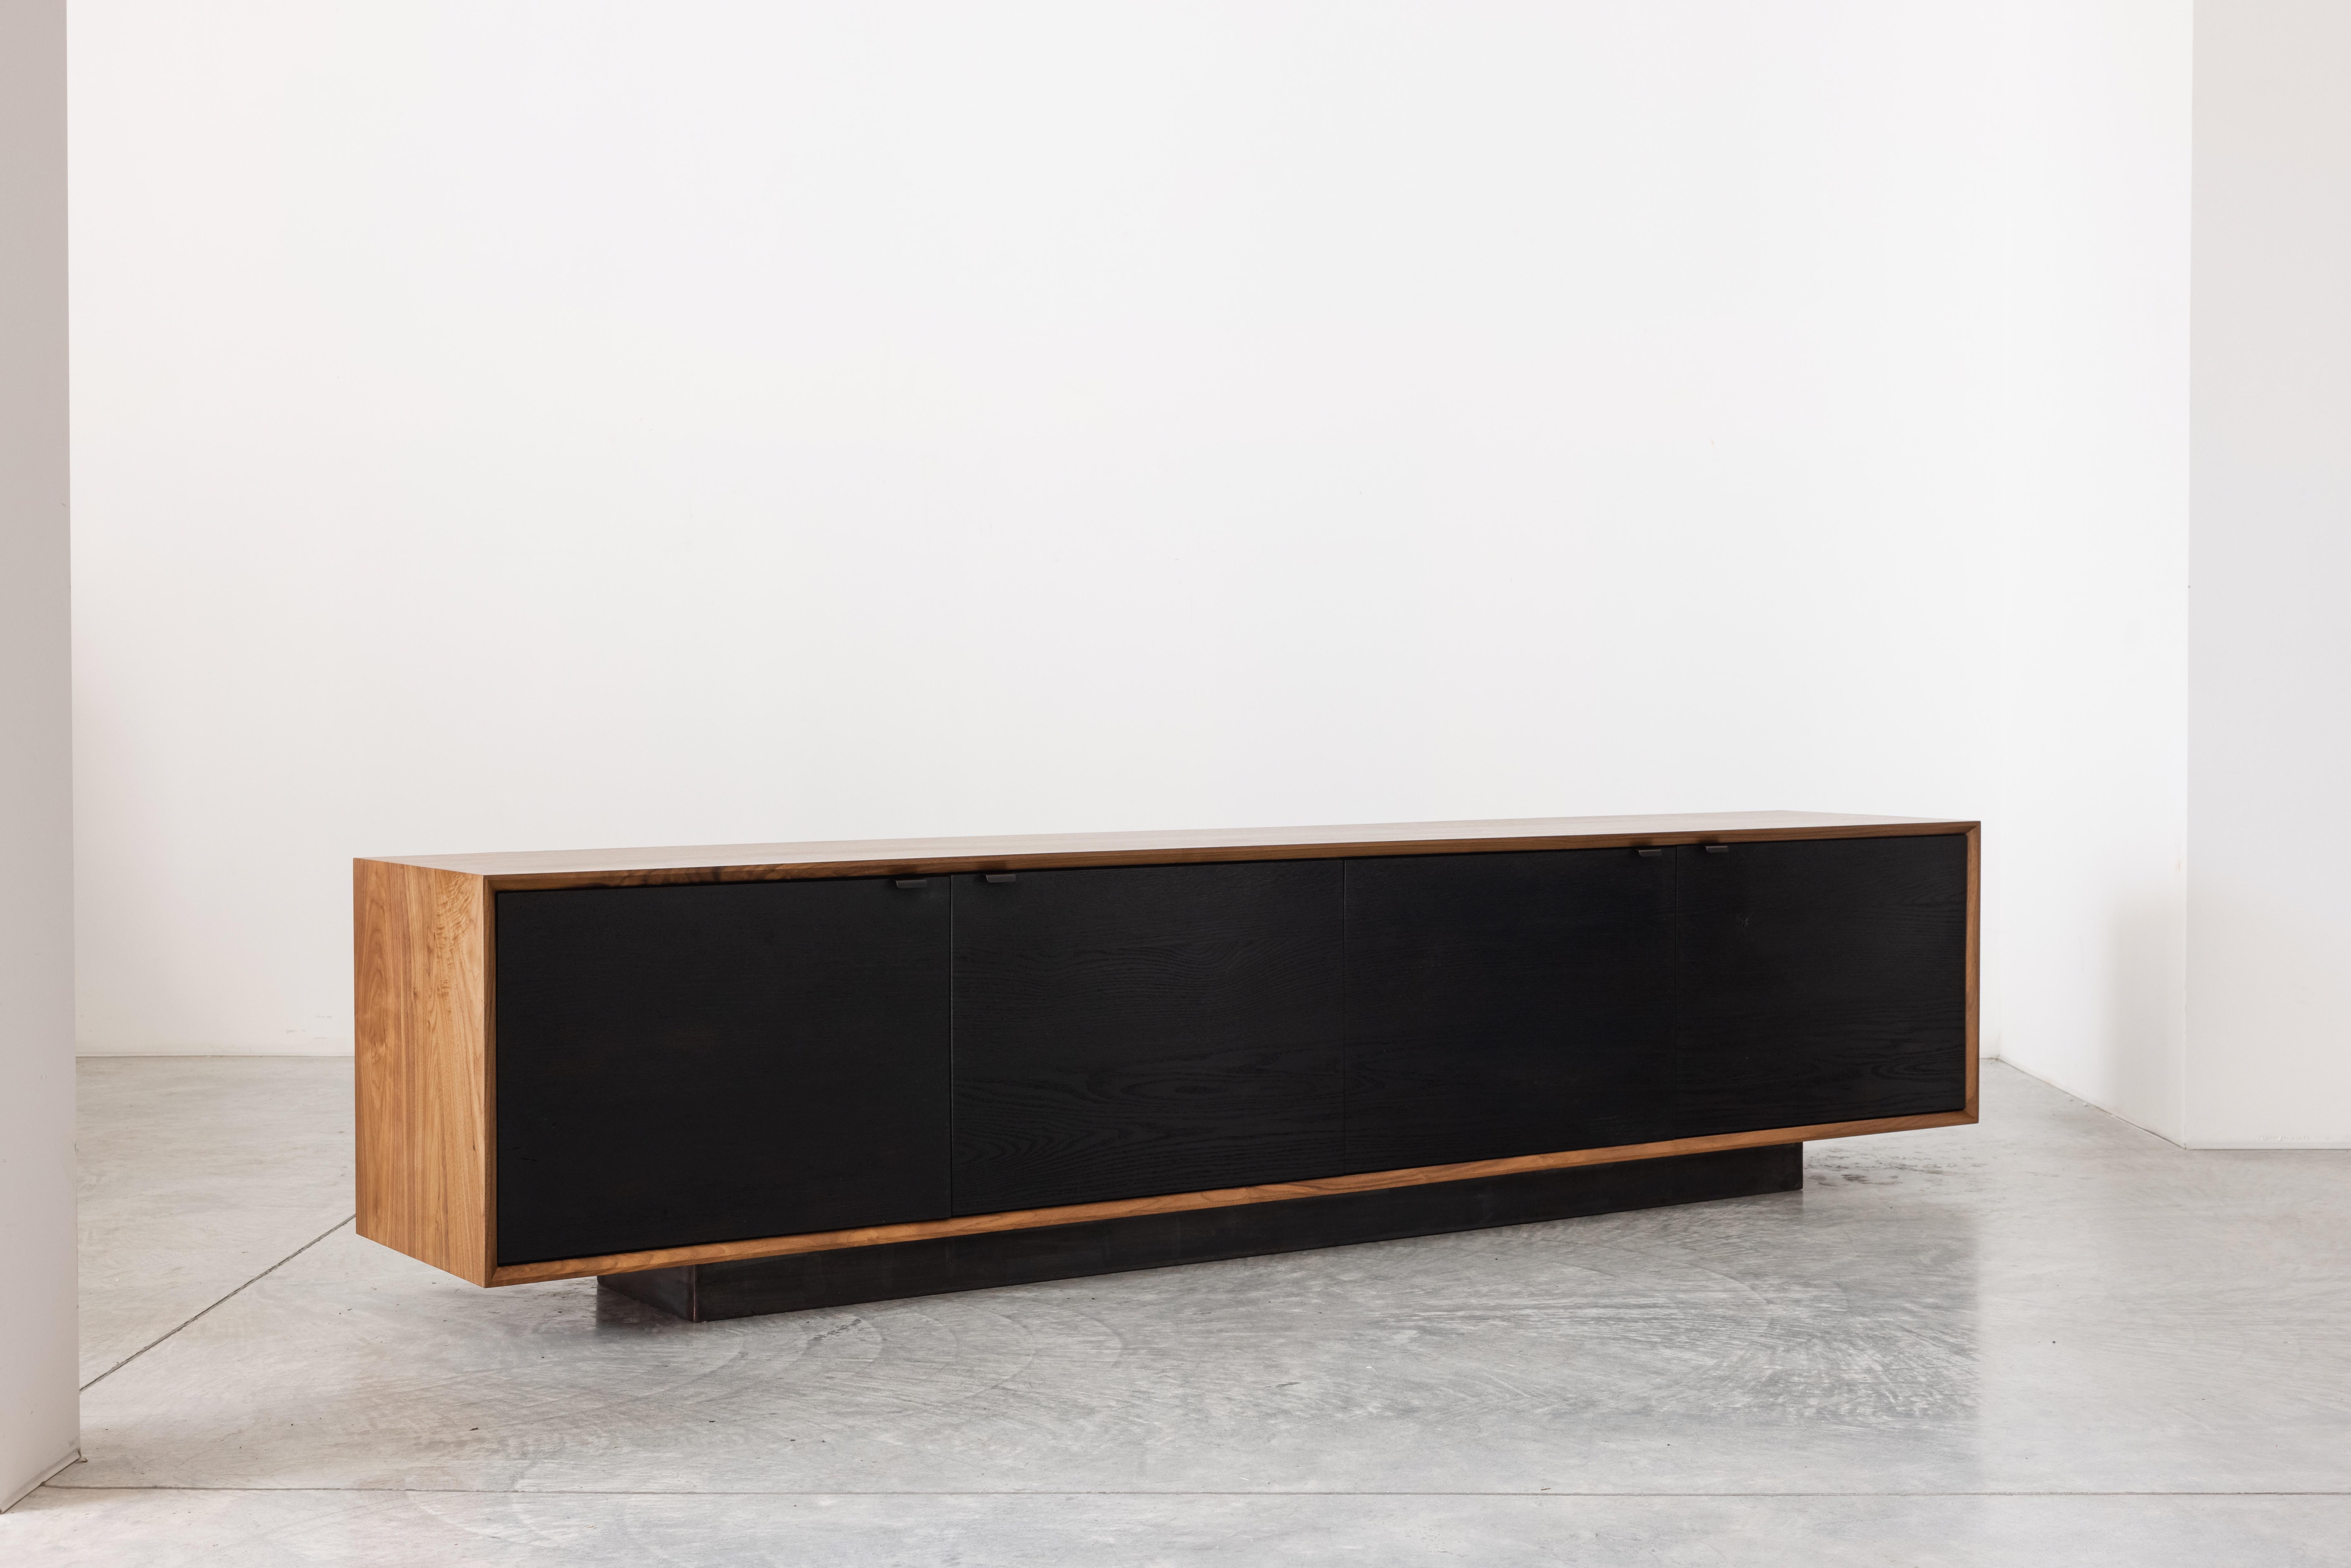 The Baxter Low Credenza has a sleek profile, showcasing four cabinet doors. The credenza uses solid black walnut constructed with, an uncommonly practiced, entirely solid wood carcass, and interior shelves. For dramatic contrast, the credenza doors